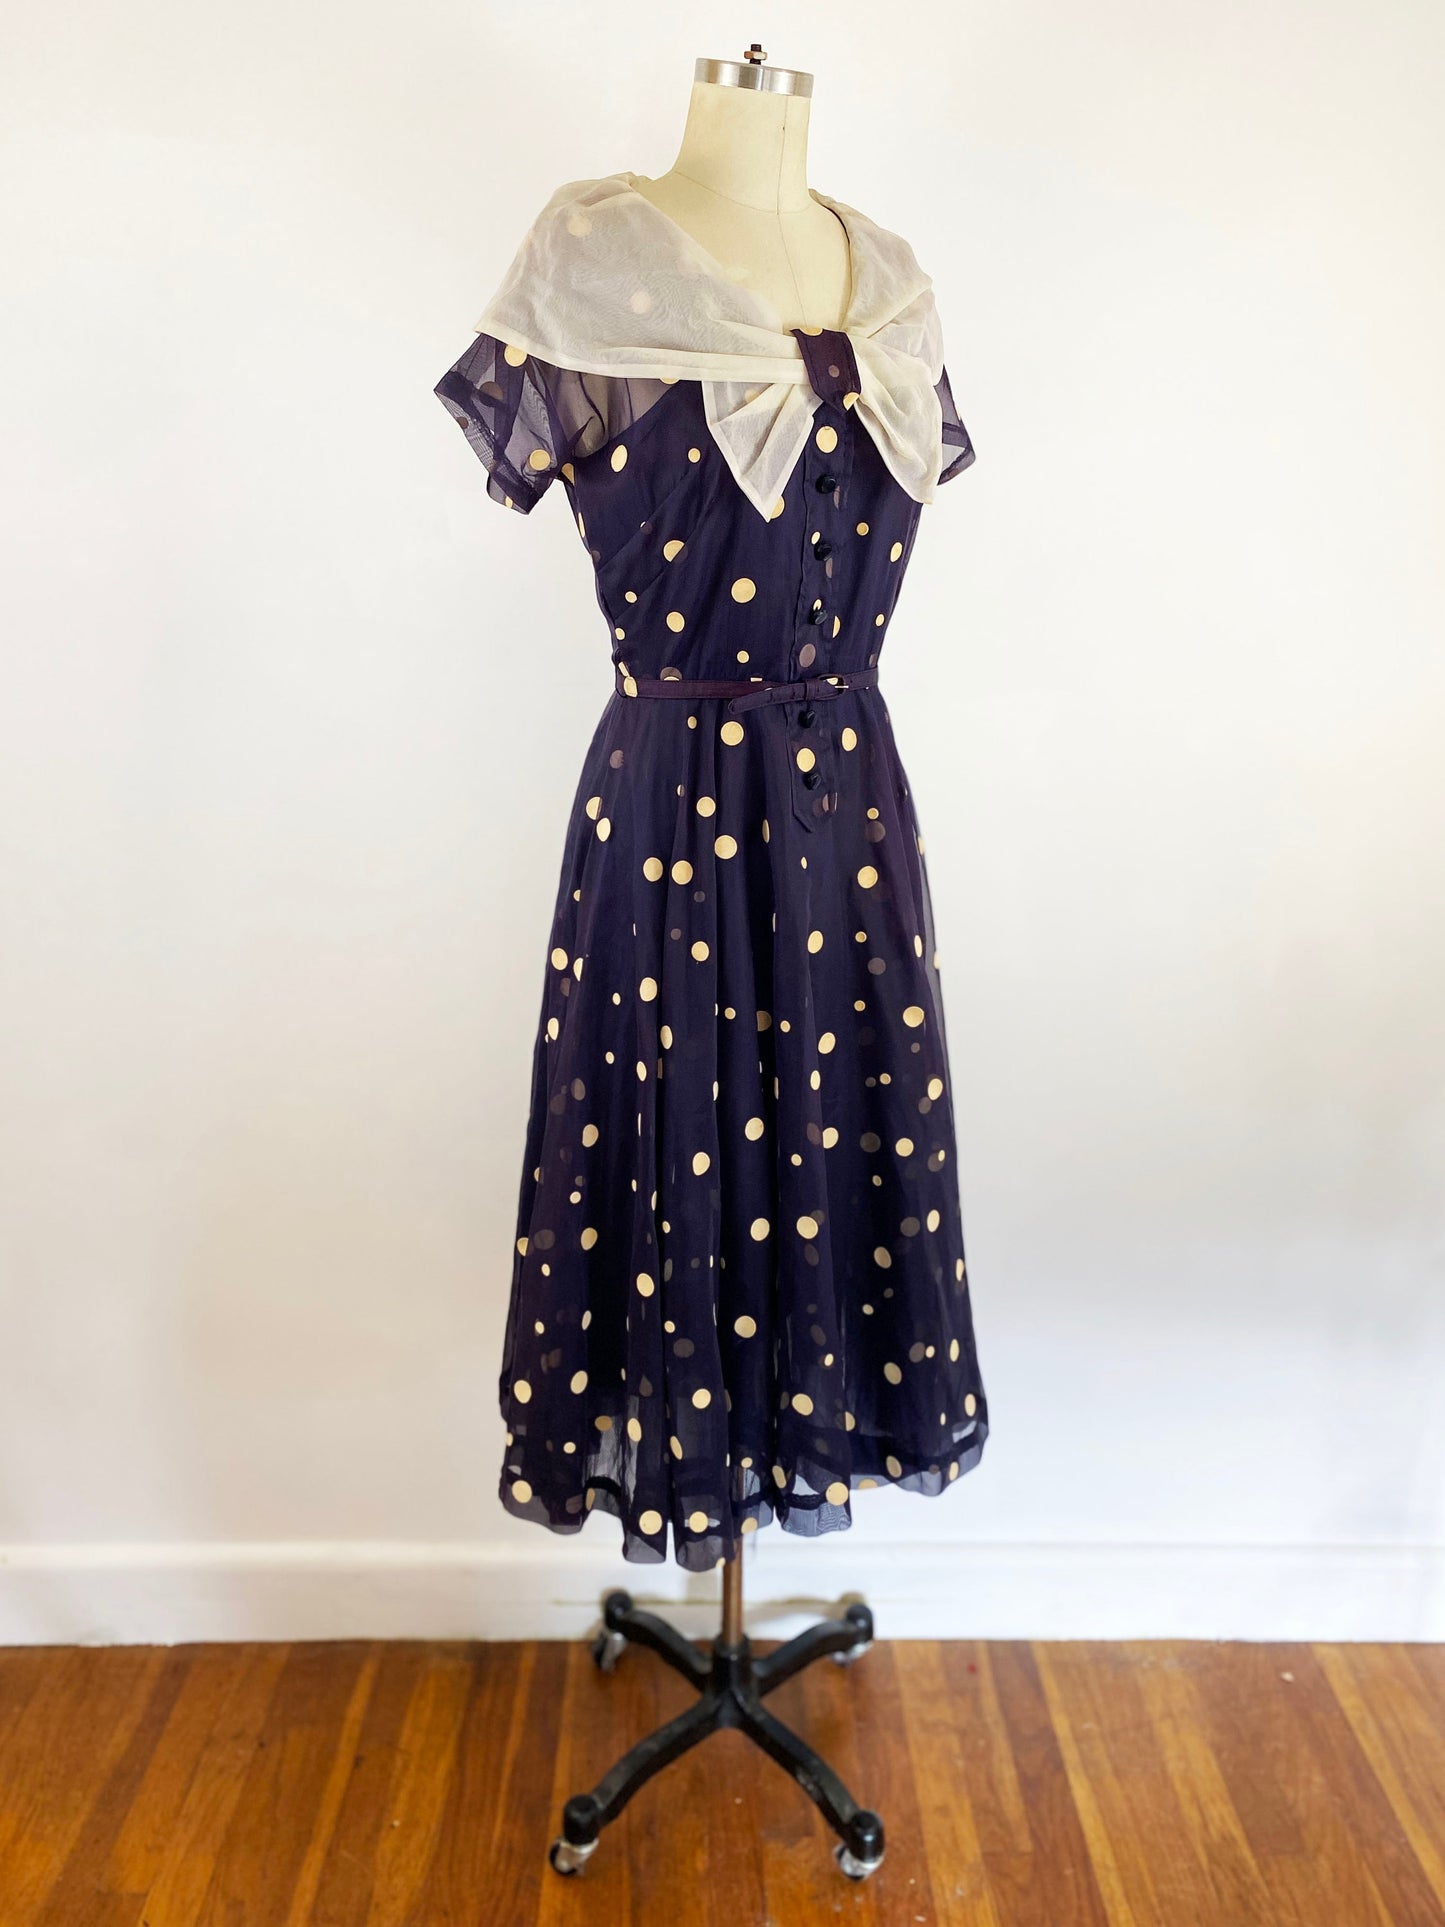 1940s Indigo Sheer Nylon and Tan Felted Polka Dot Dress Fit and Flare Dress A-line Elegant Cocktail Party Pin Up Rockabilly / Small 4/6